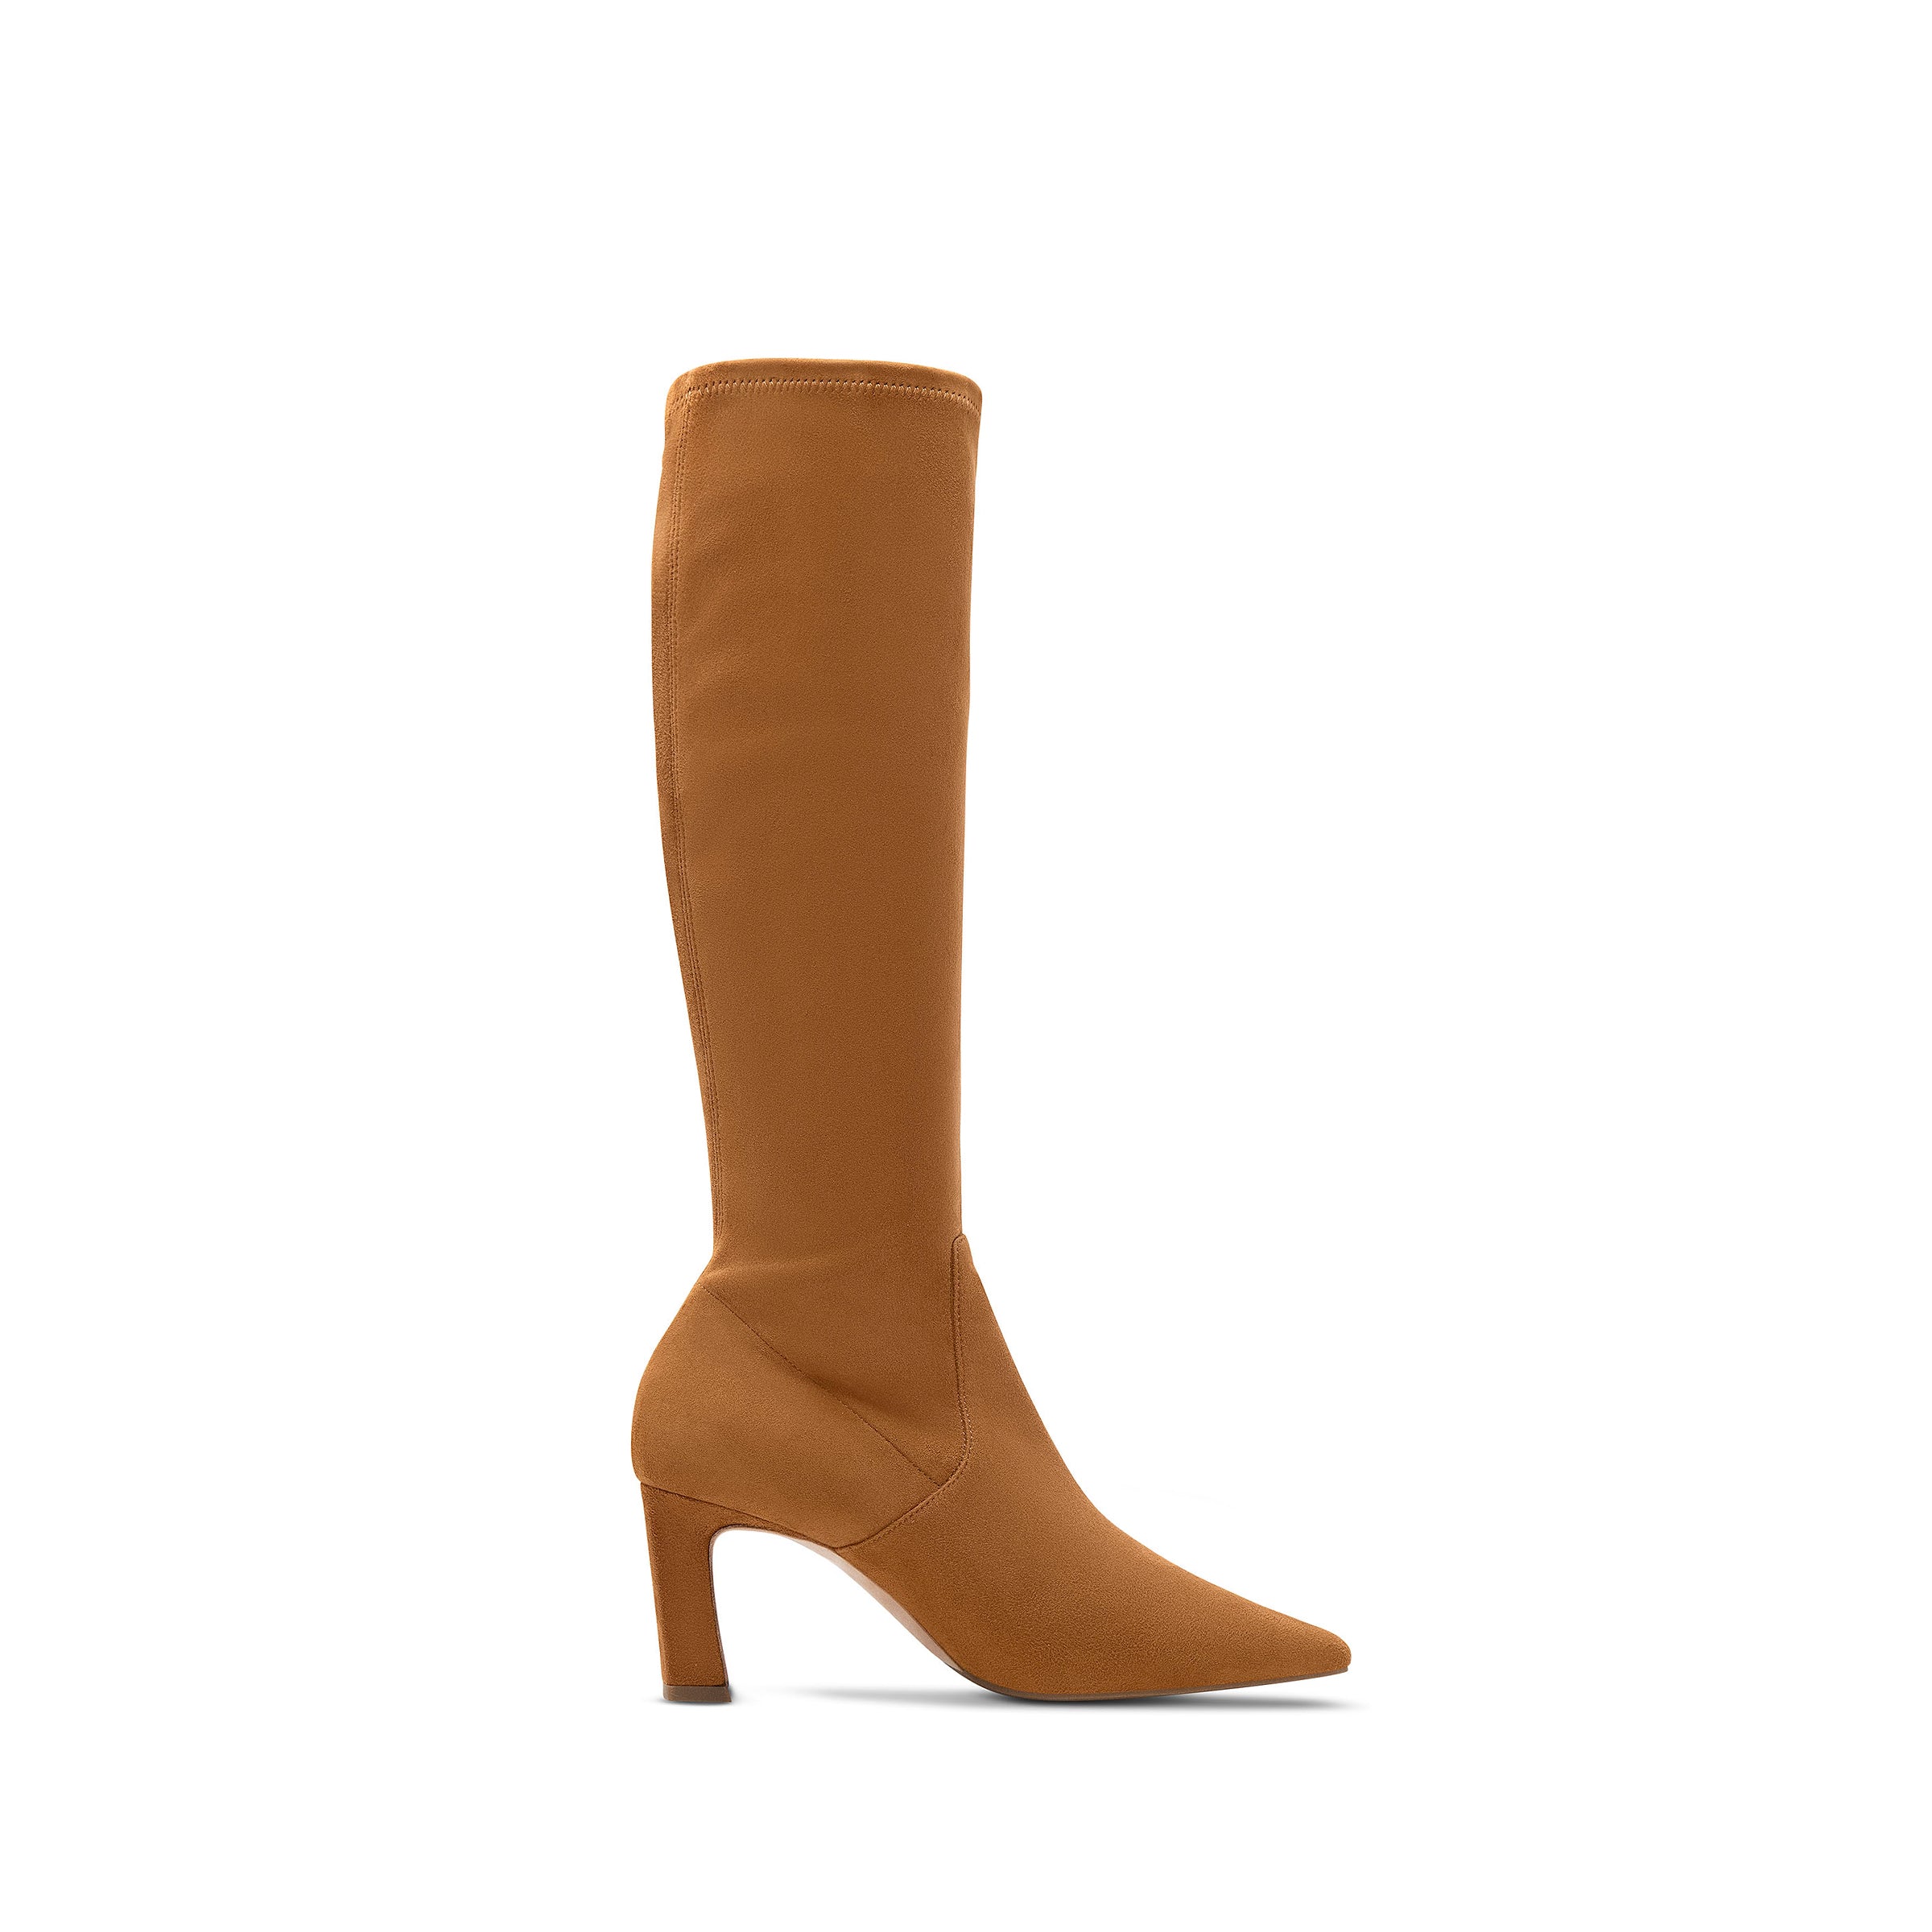 Lola 75 Stretch High Boot / Camel Suede